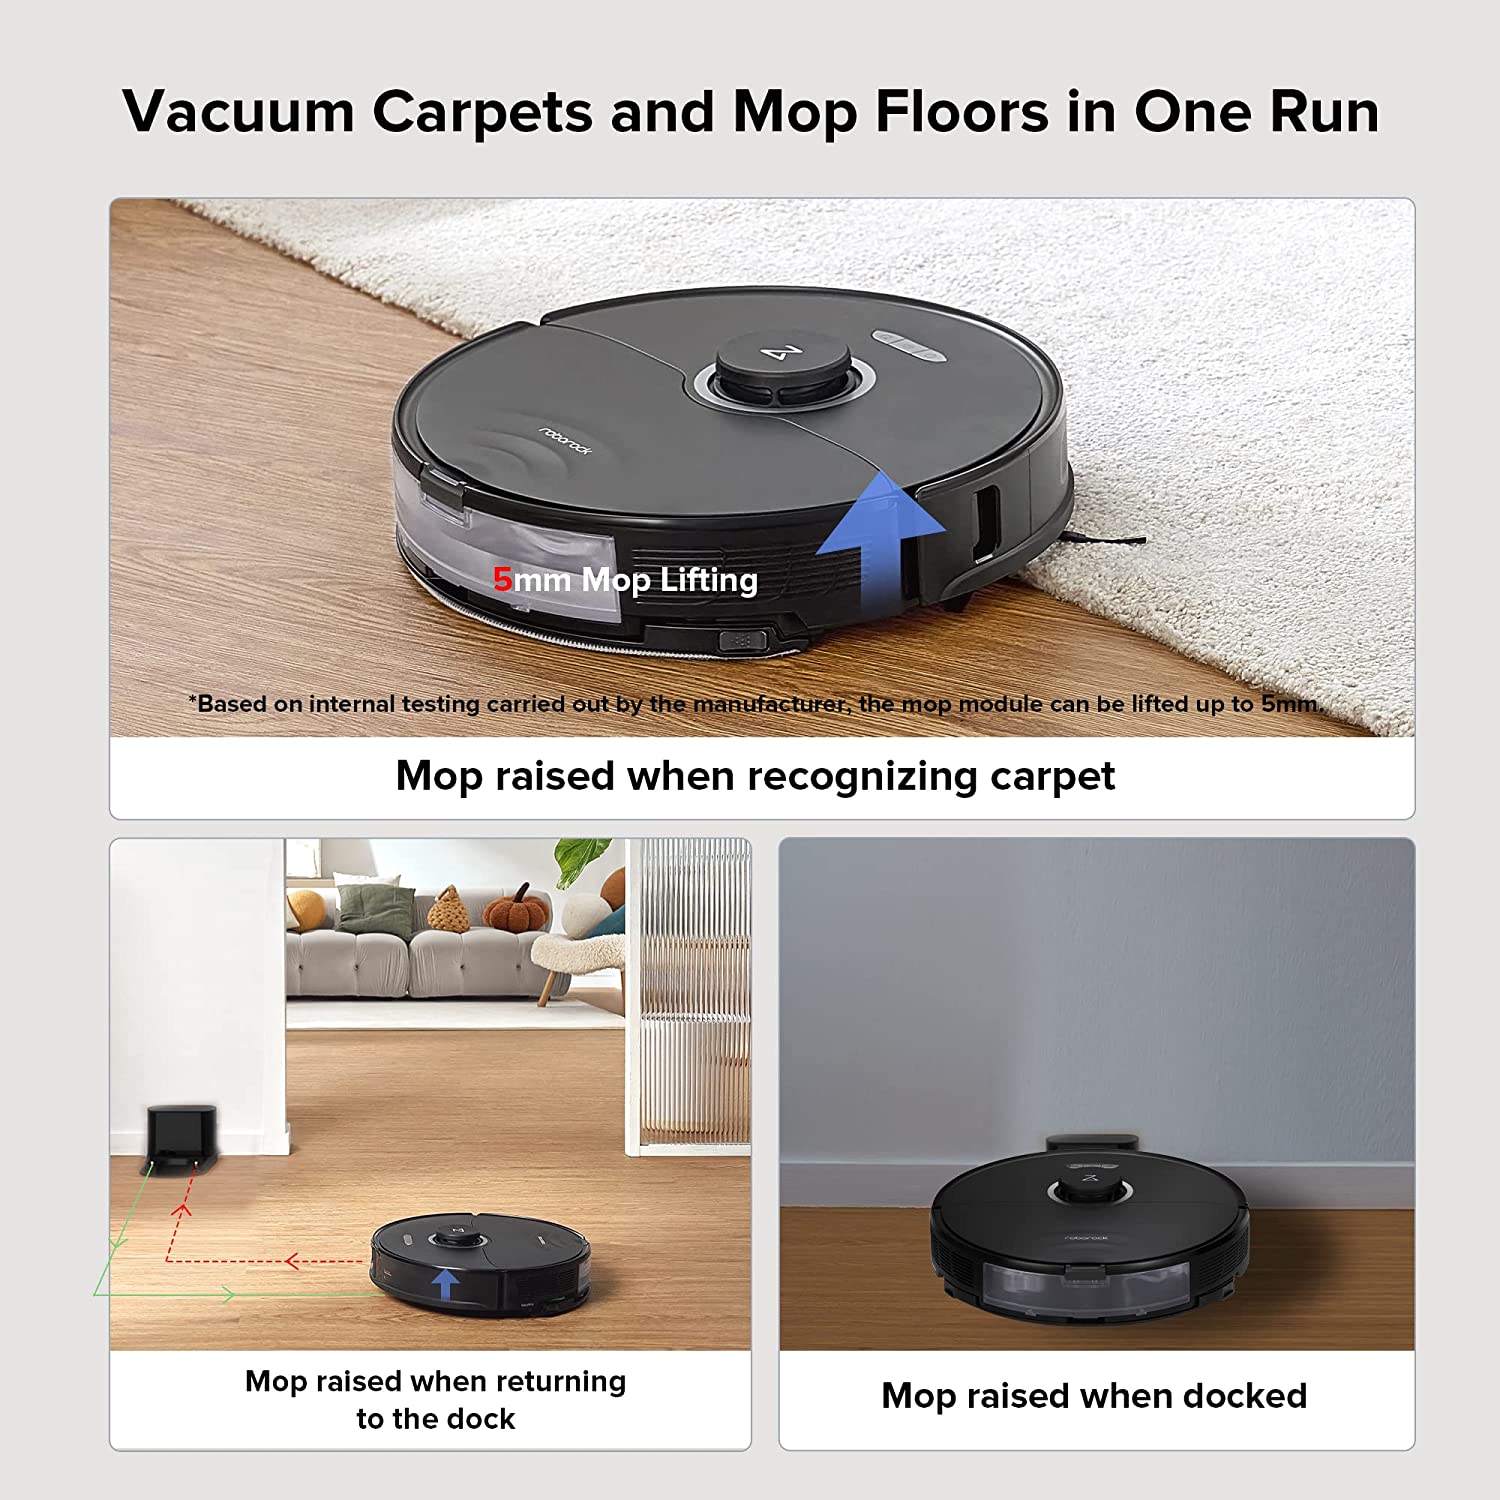 Roborock S8 Robot Vacuum and Mop Cleaner, DuoRoller Brush, 6000Pa Suction, ReactiveAI 2.0 Obstacle Avoidance, Sonic Mopping, Auto Lifting Mop, Works with Alexa, Perfect for Pet Hair, White